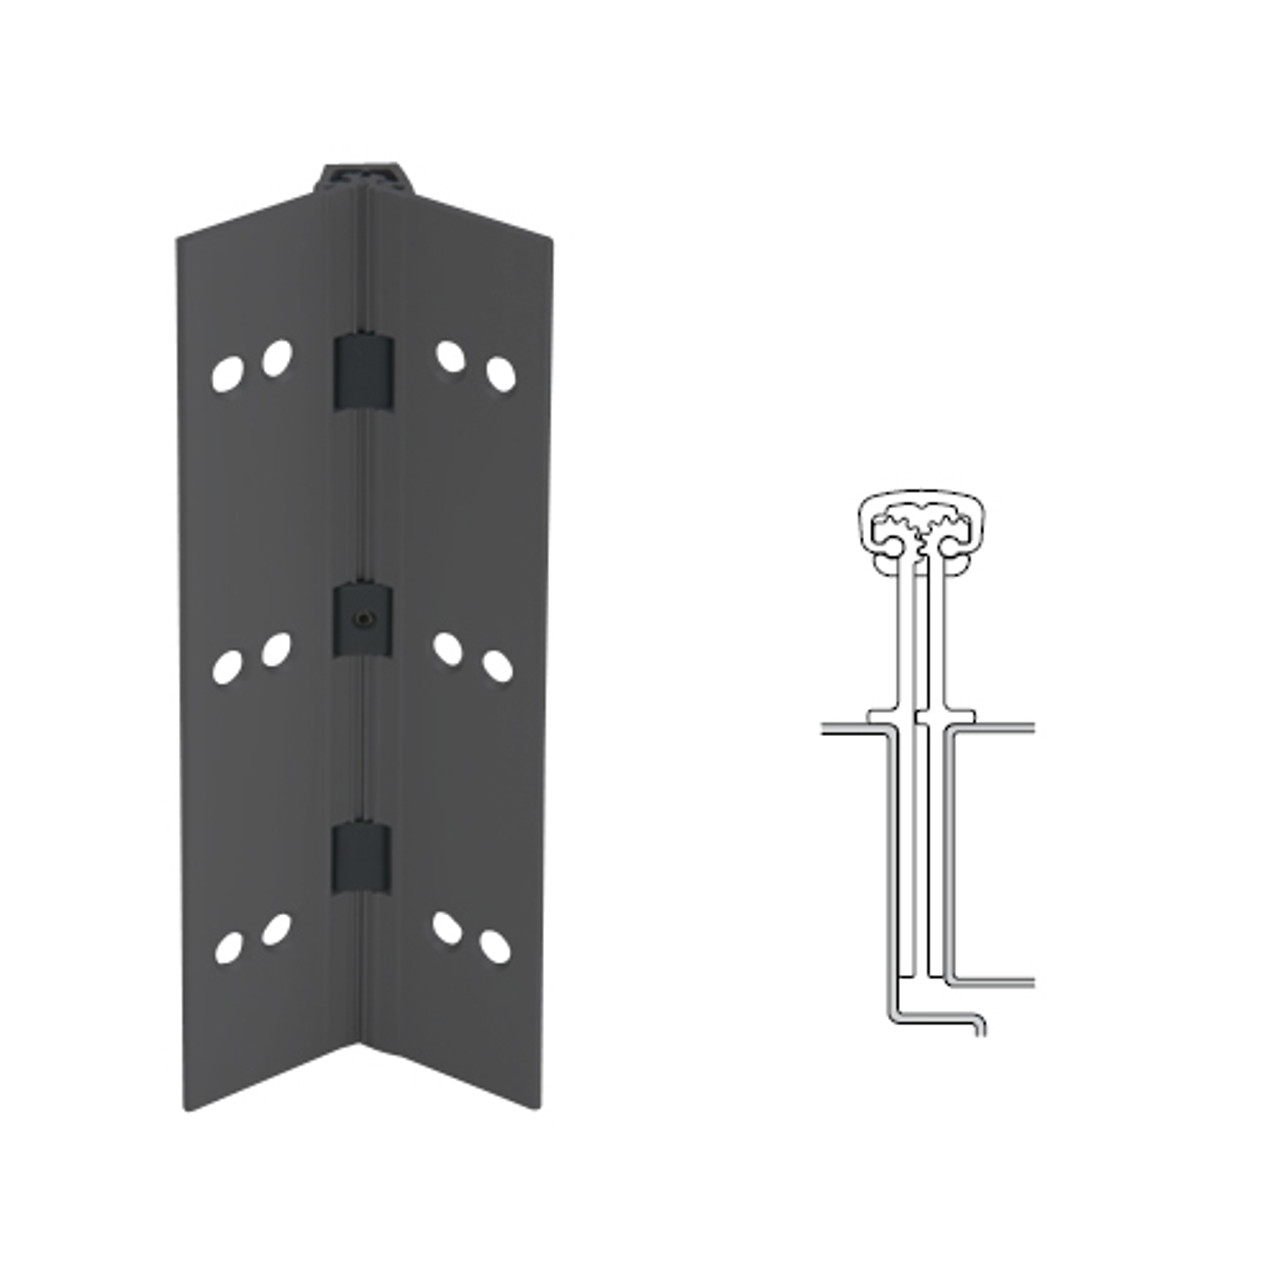 040XY-315AN-120-TEKWD IVES Full Mortise Continuous Geared Hinges with Wood Screws in Anodized Black